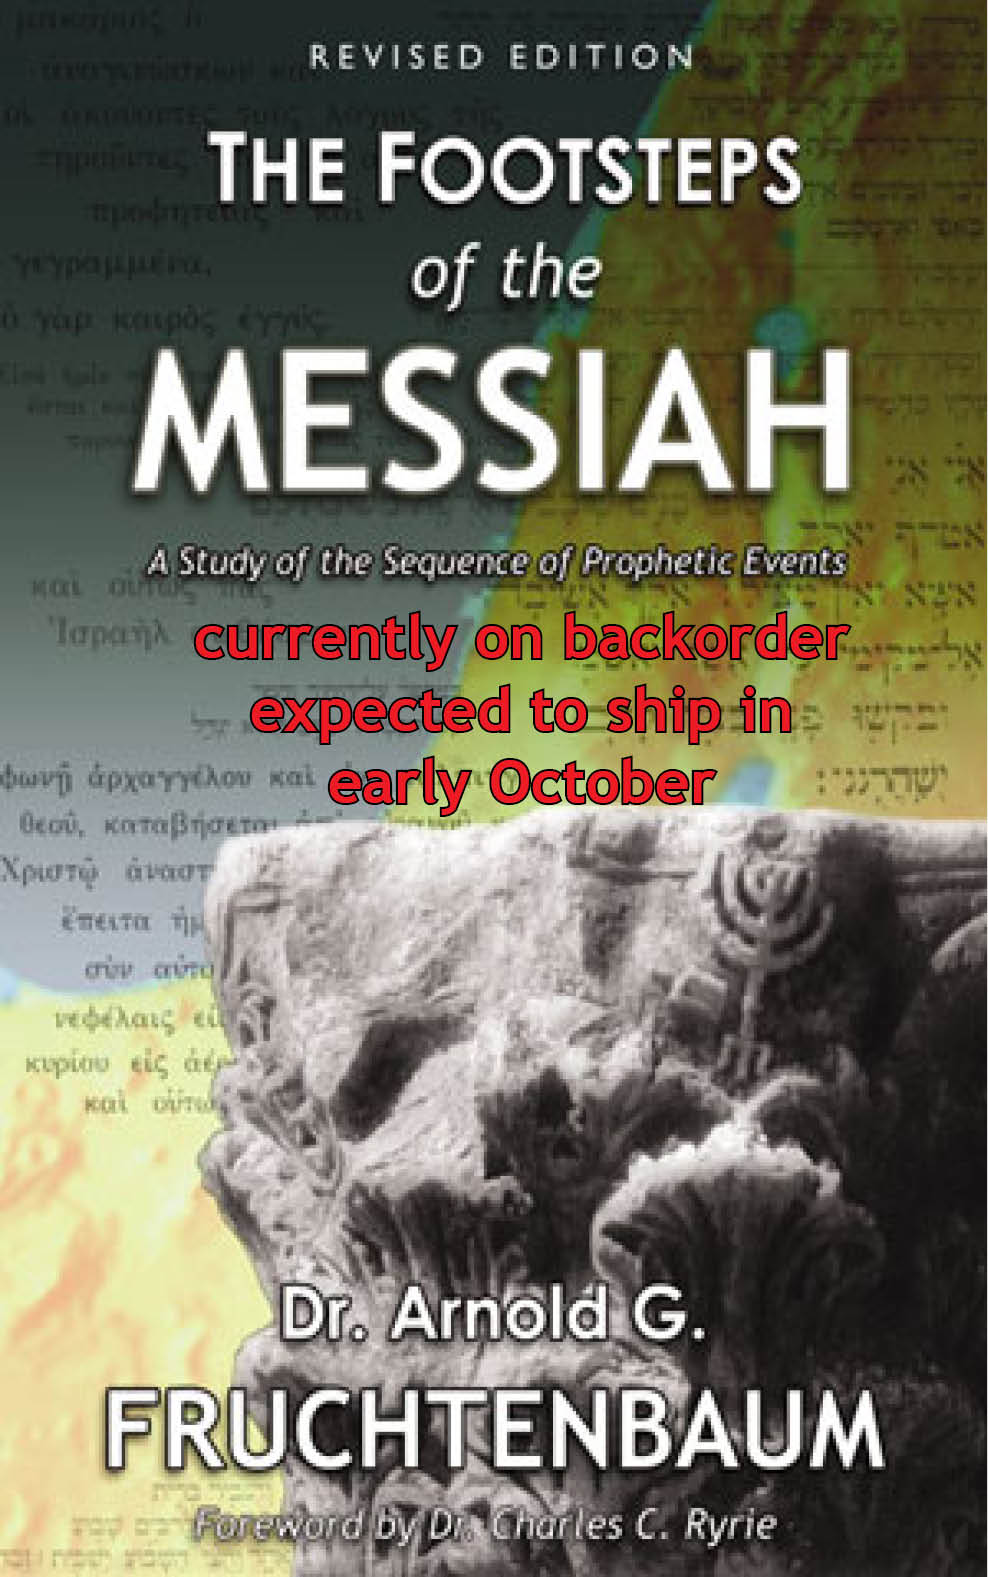 The Footsteps of the Messiah - Revised 2020 Edition